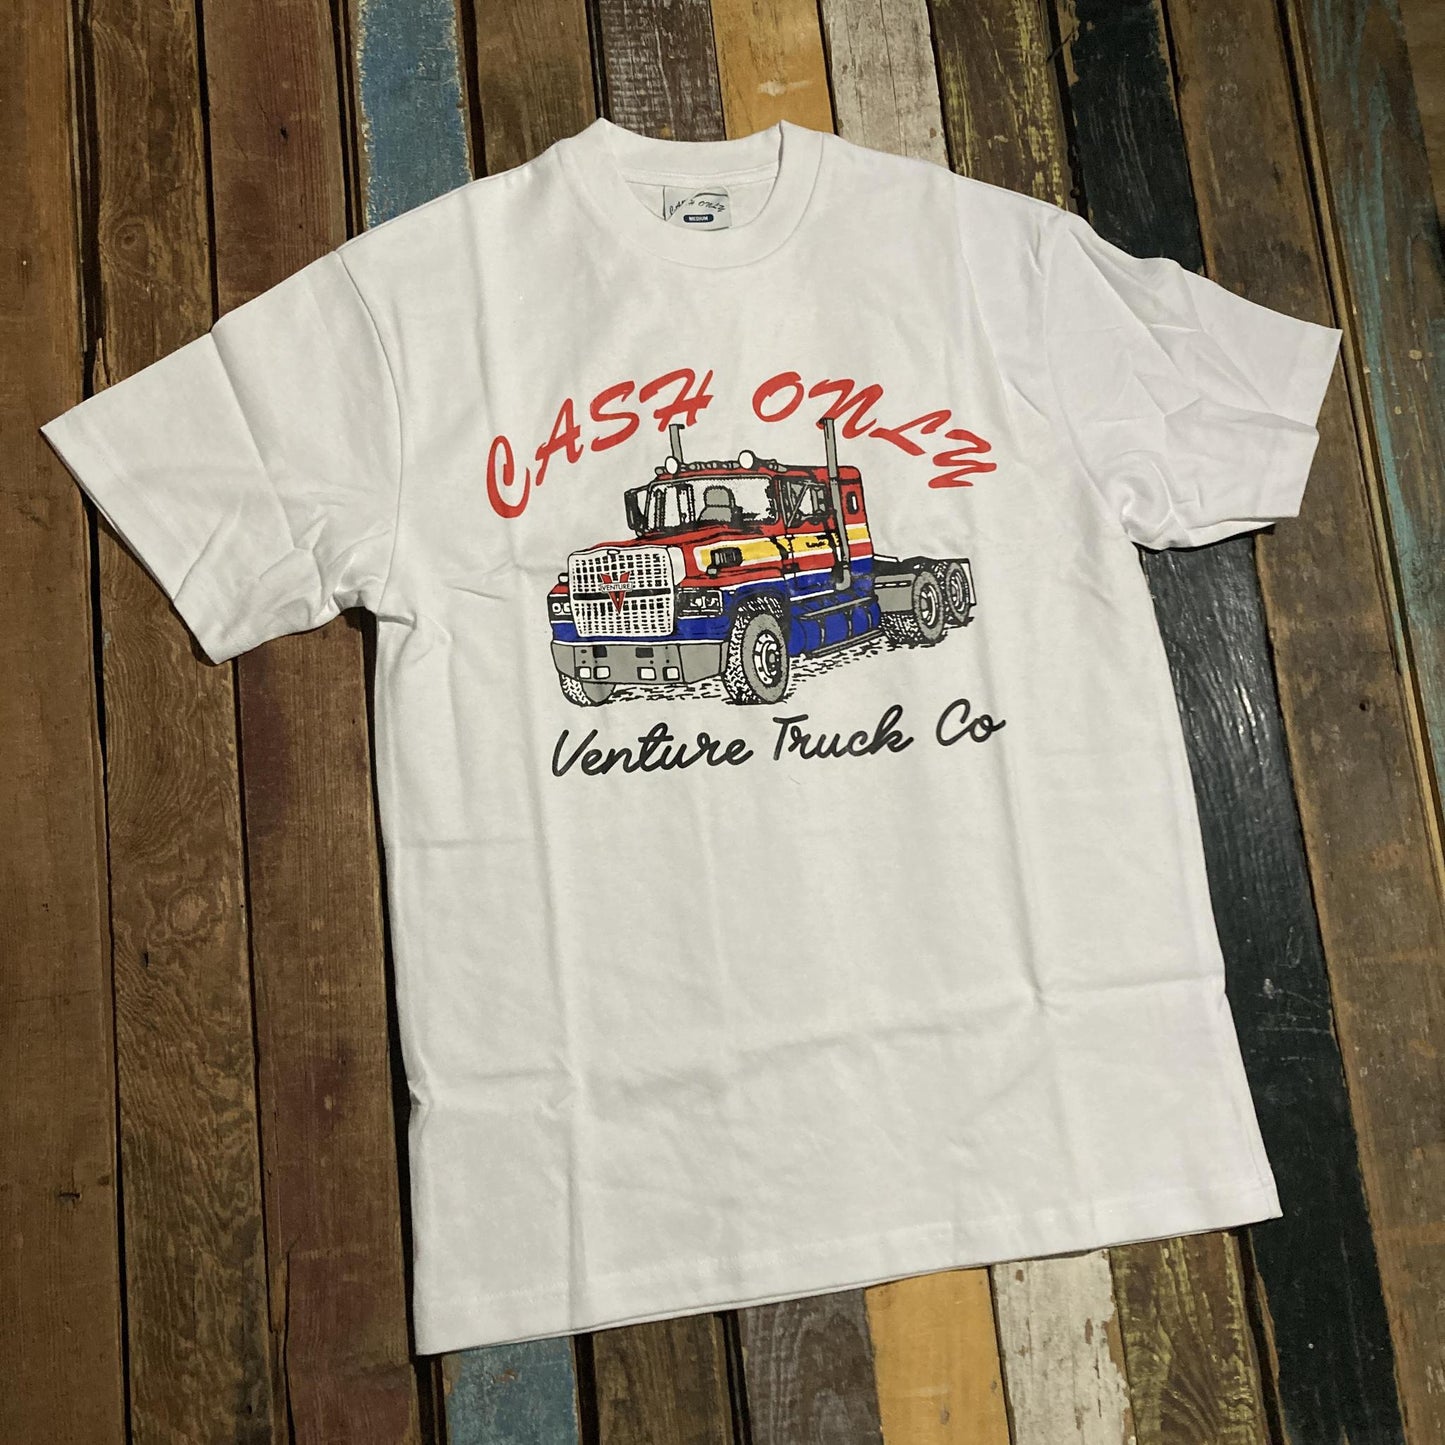 Cash Only X Venture Truck Tee White